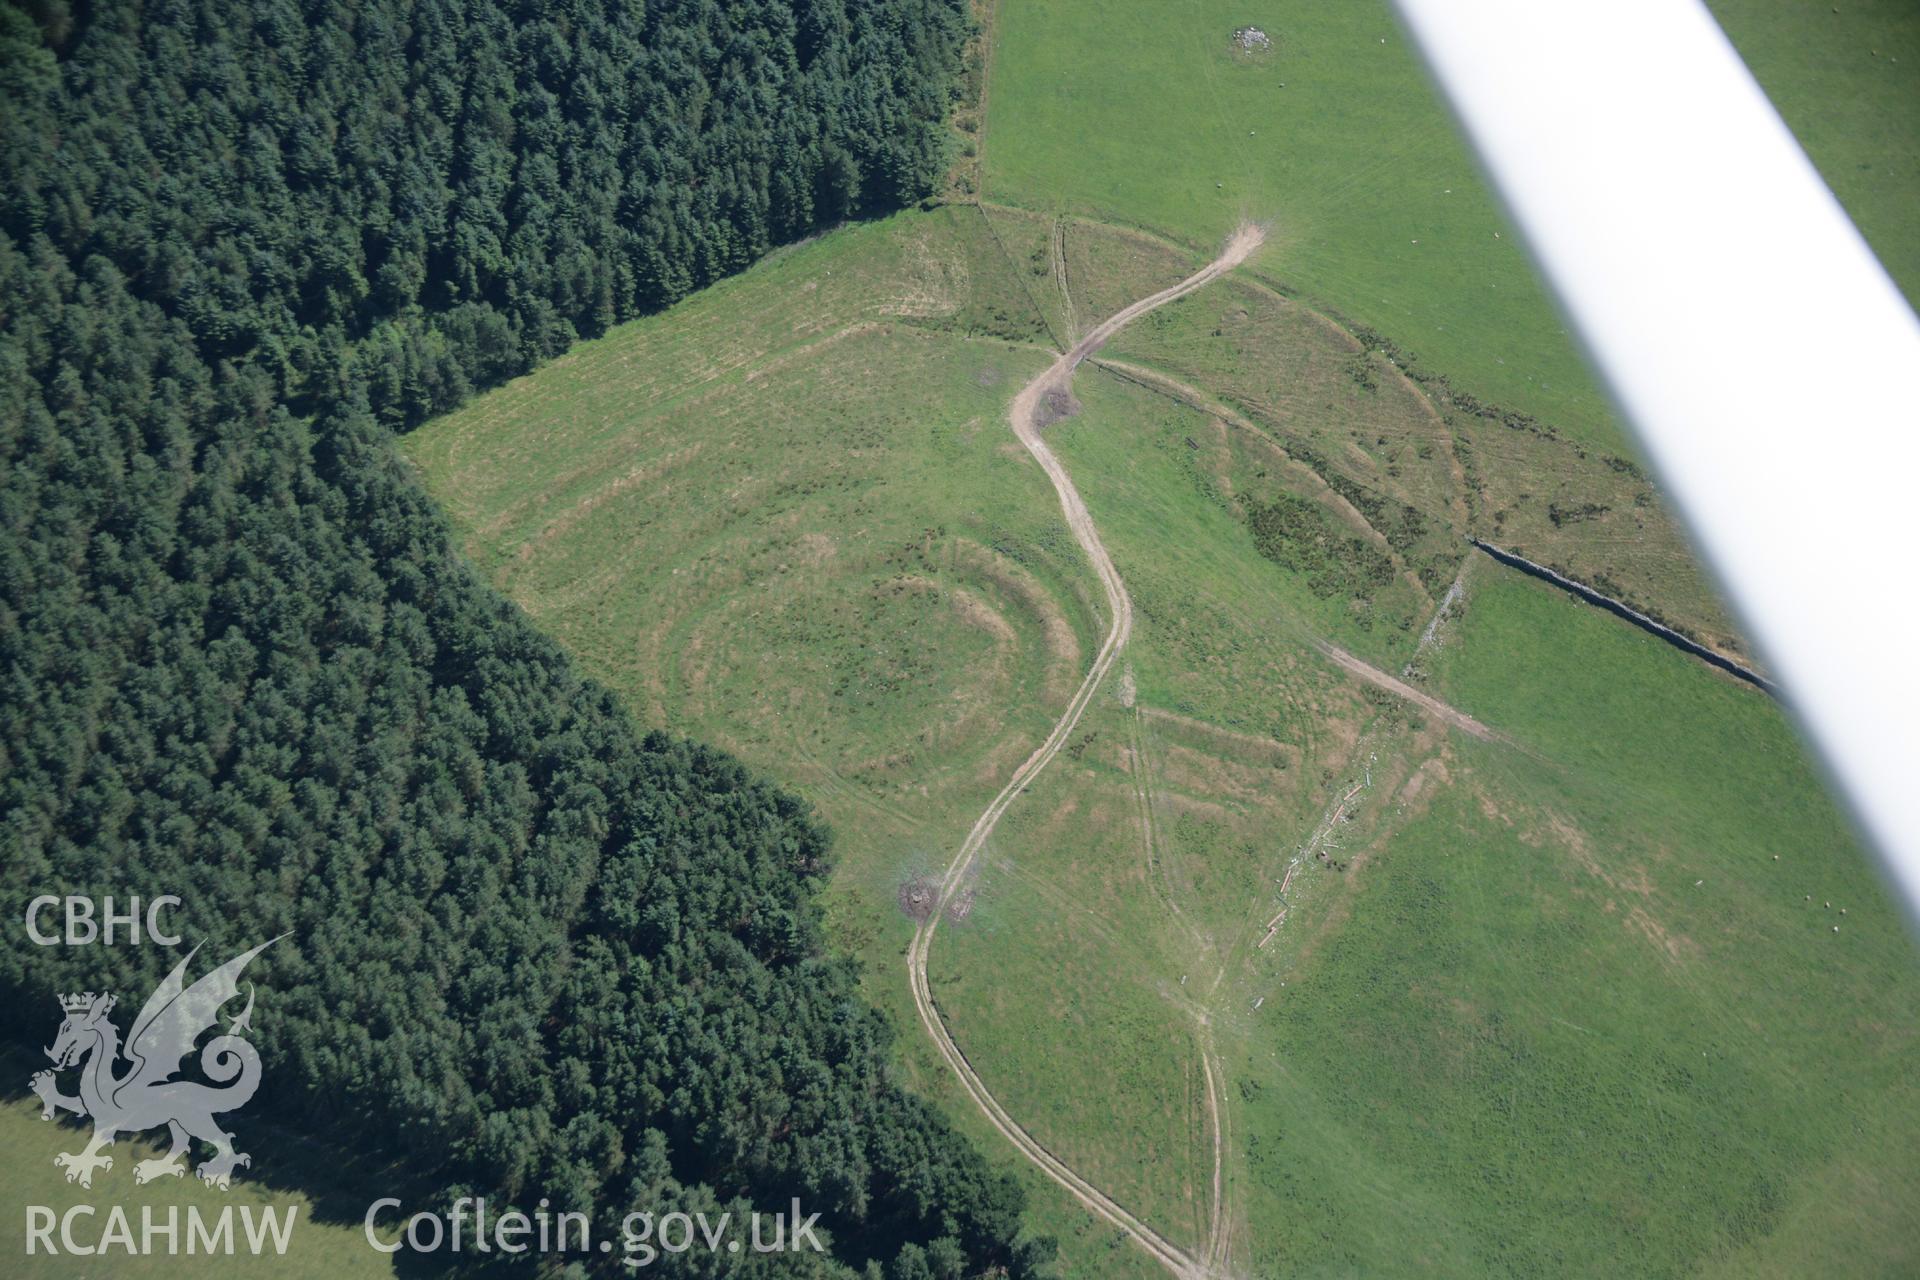 RCAHMW colour oblique aerial photograph of Gaer Fawr. Taken on 24 July 2006 by Toby Driver.